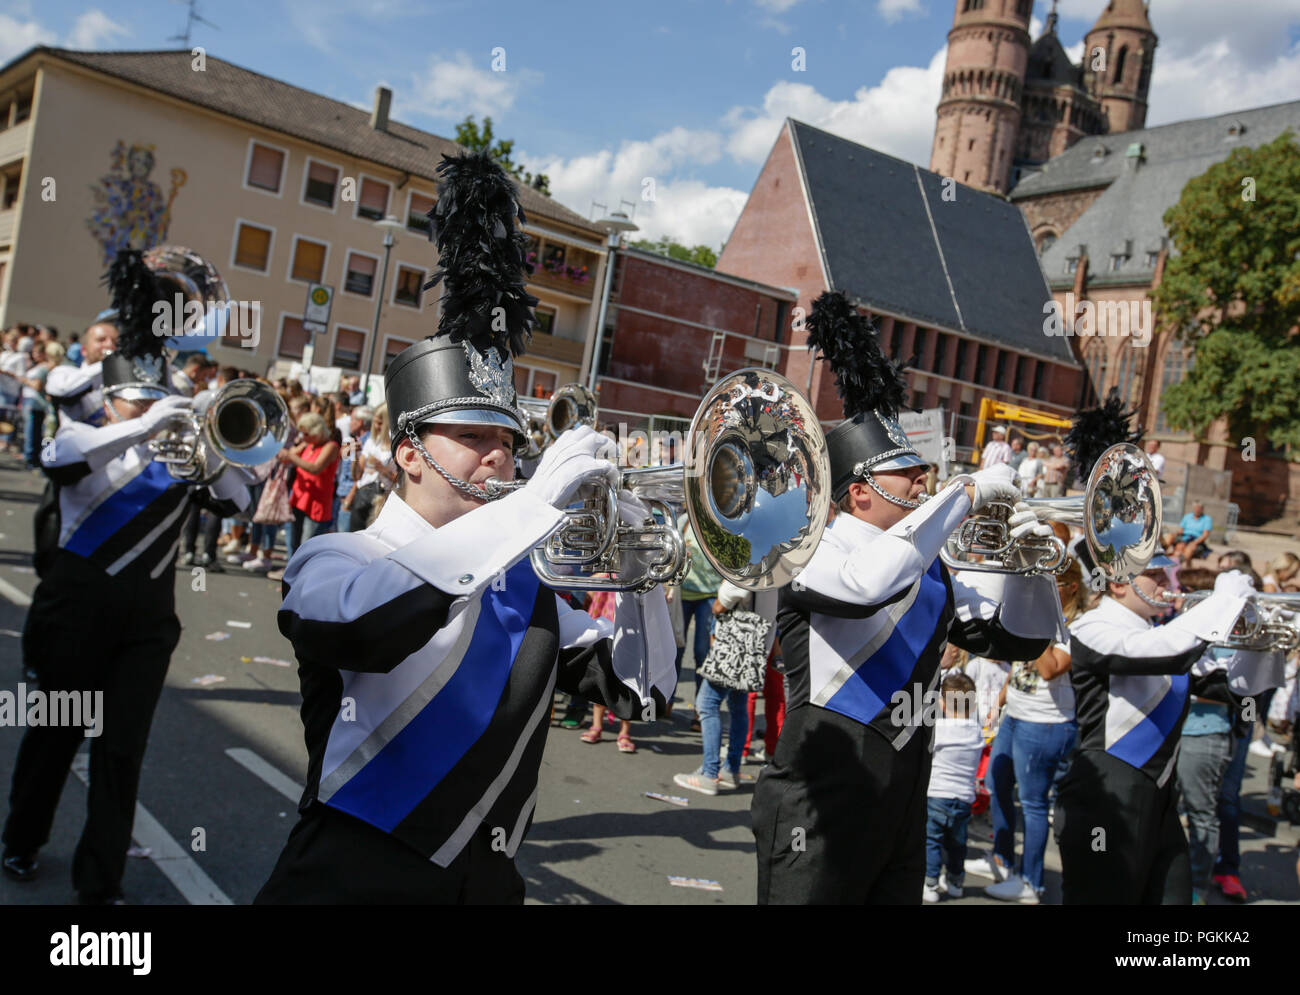 Worms, Germany. 26th Aug, 2018. The Heartliner marching band from Ludwigshafen marches in the parade. The first highlight of the 2018 Backfischfest was the big parade through the city of Worms with over 70 groups and floats. Community groups, music groups and businesses from Worms and further afield took part. Credit: Michael Debets/Pacific Press/Alamy Live News Stock Photo